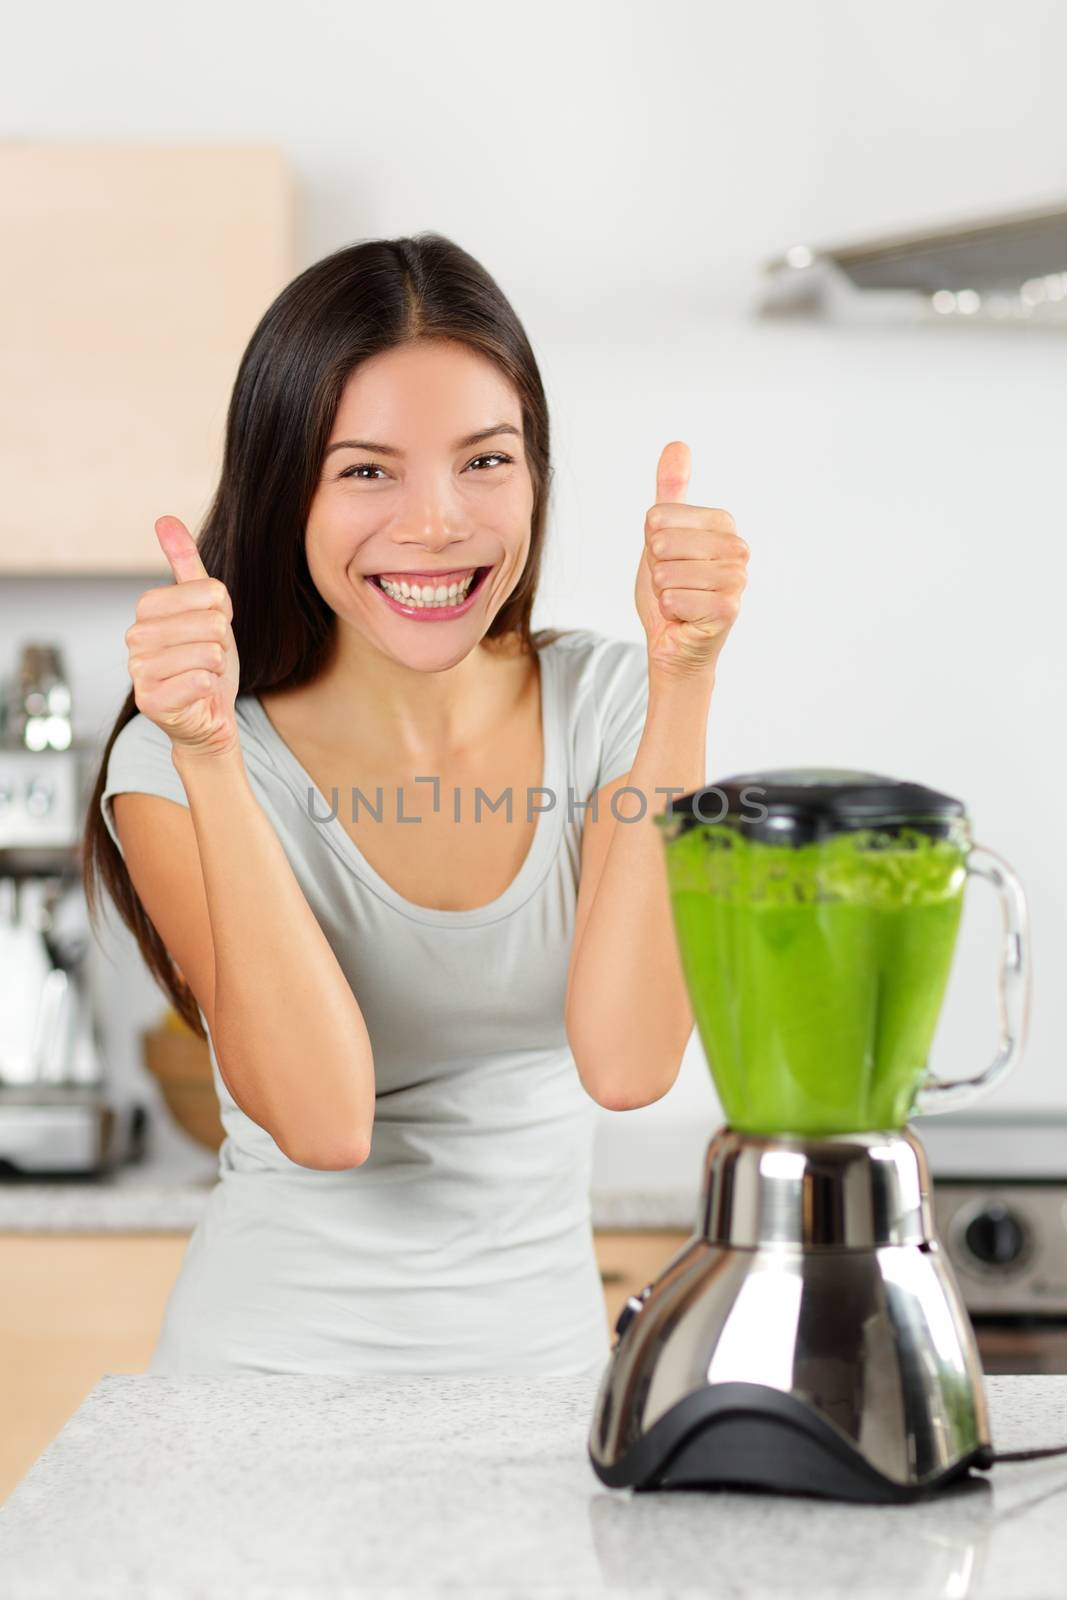 Vegetable smoothie woman happy thumbs up blending green smoothies with blender home in kitchen. Healthy eating lifestyle concept portrait of beautiful young woman preparing drink with spinach, carrots, celery etc.